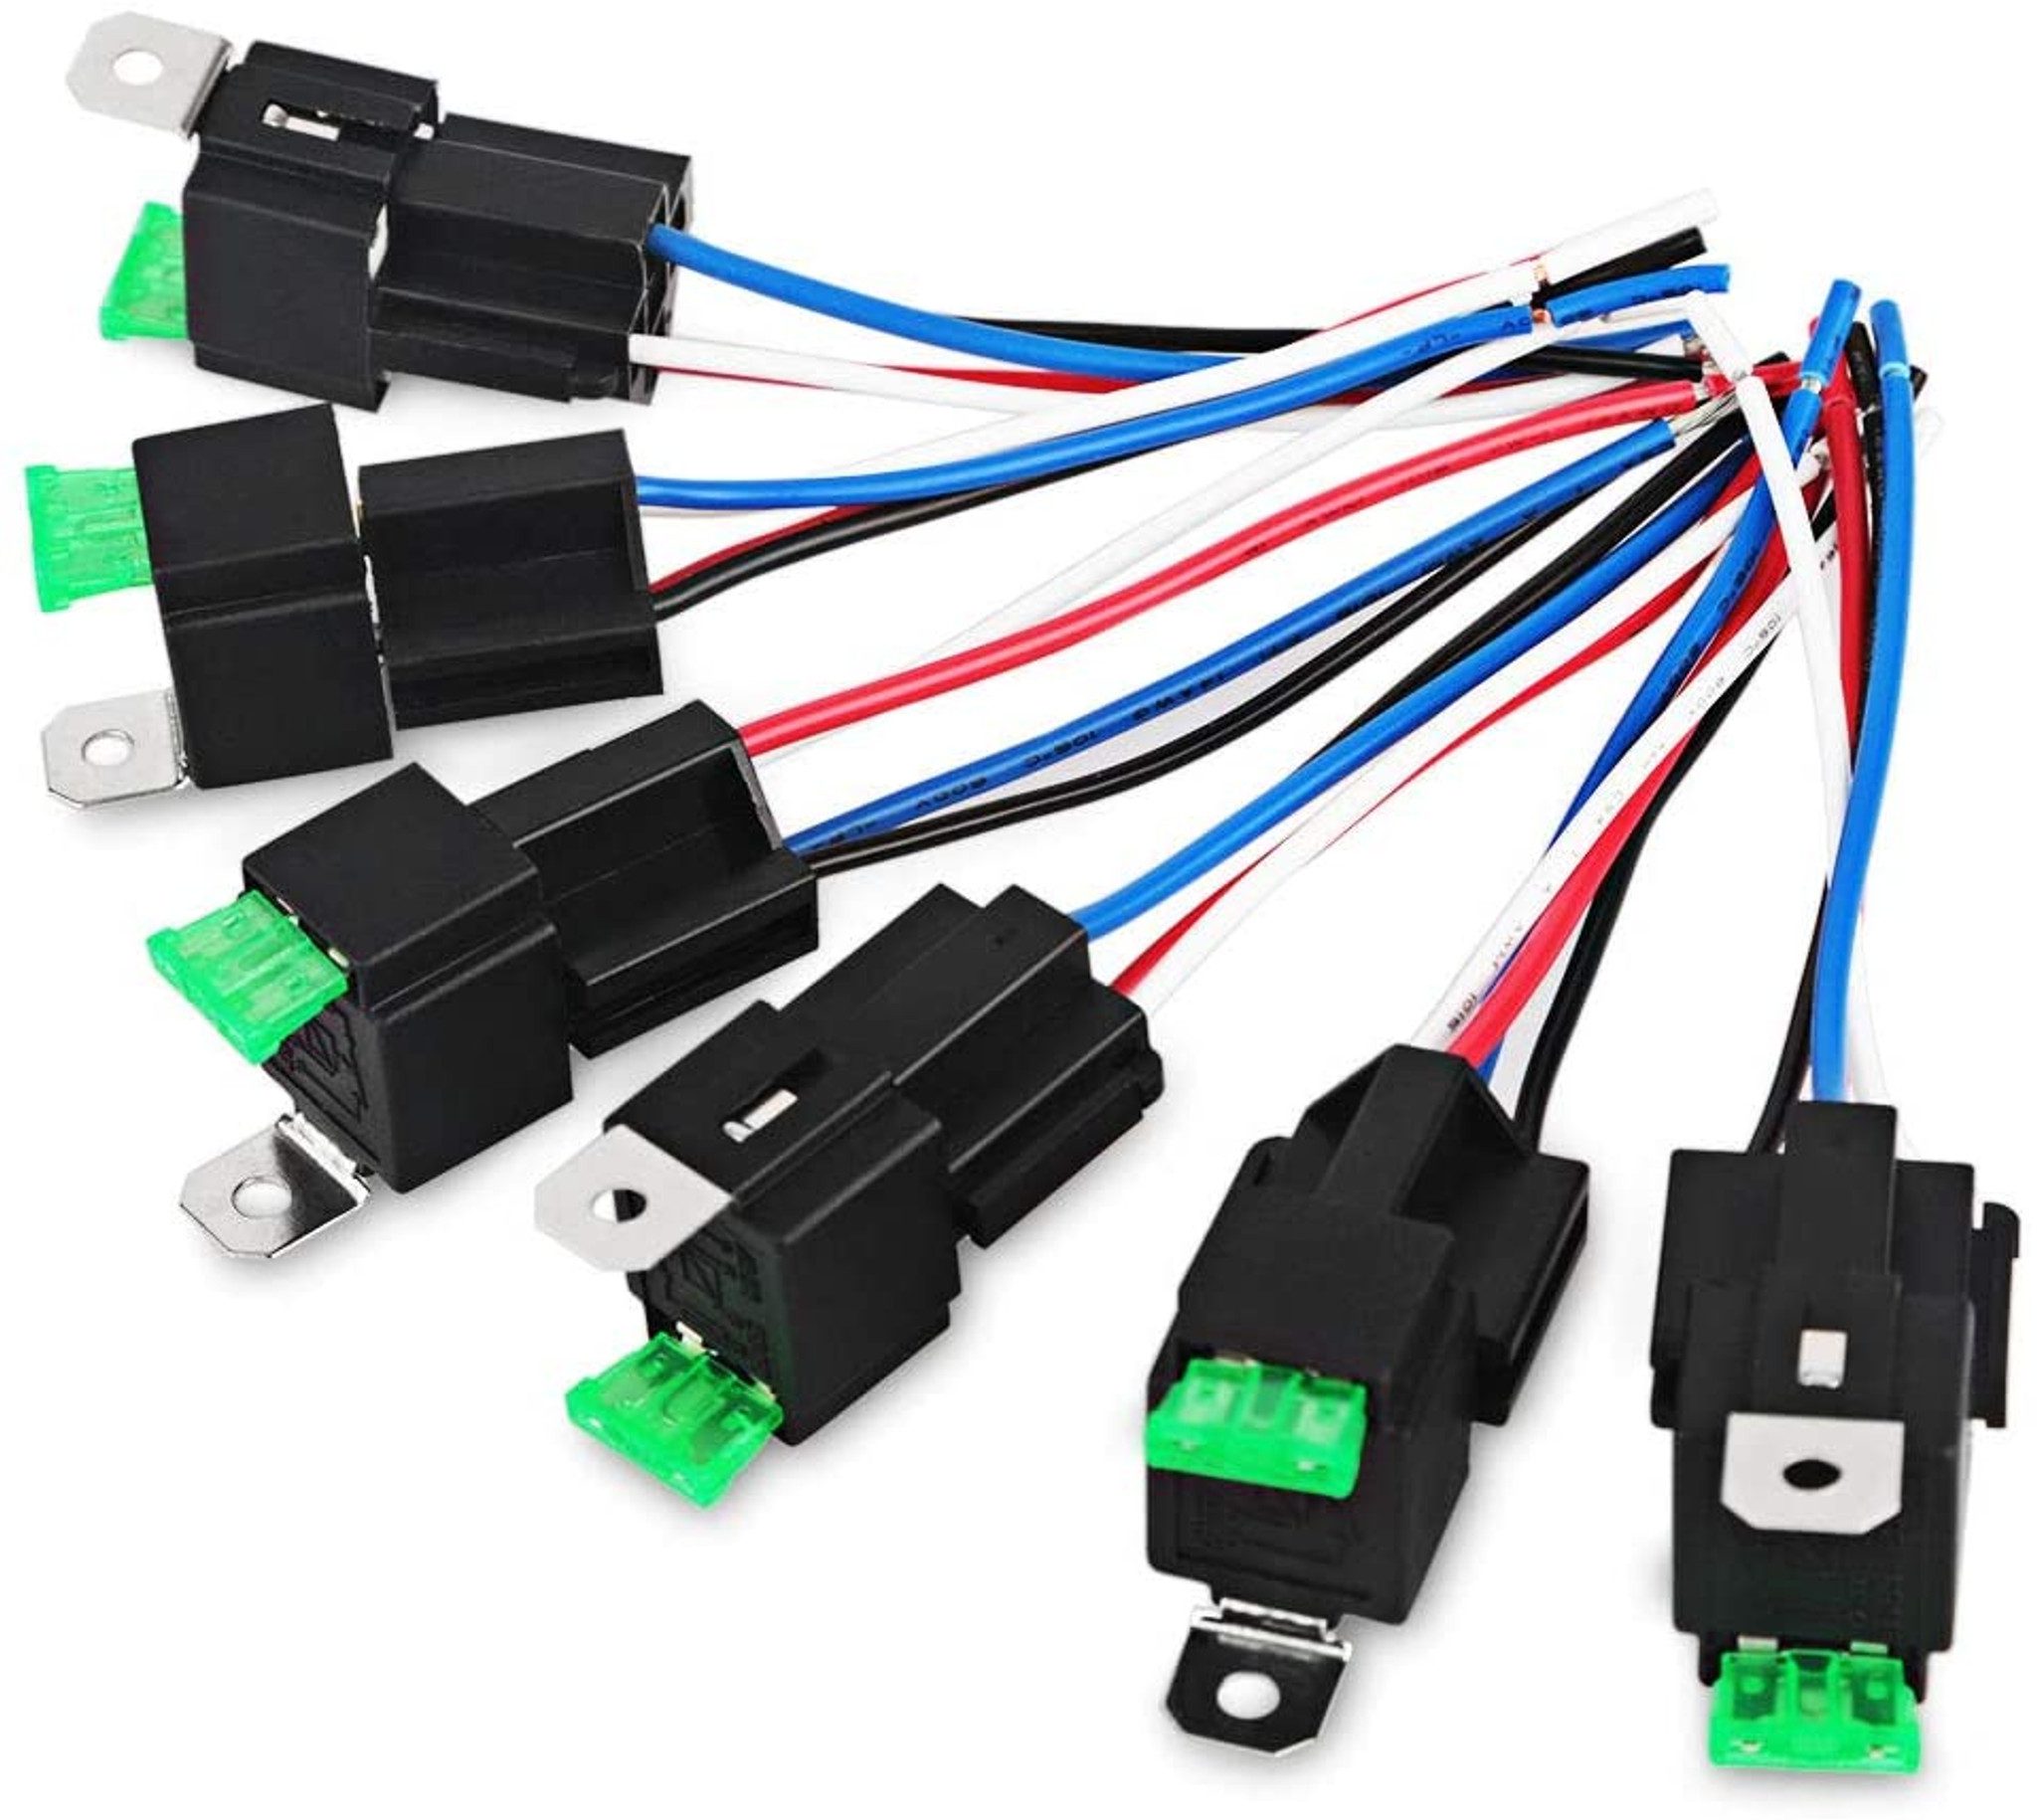 A set of 30A Fused Relay with 4-Pin Harness (6 Pack) wires with green wires.